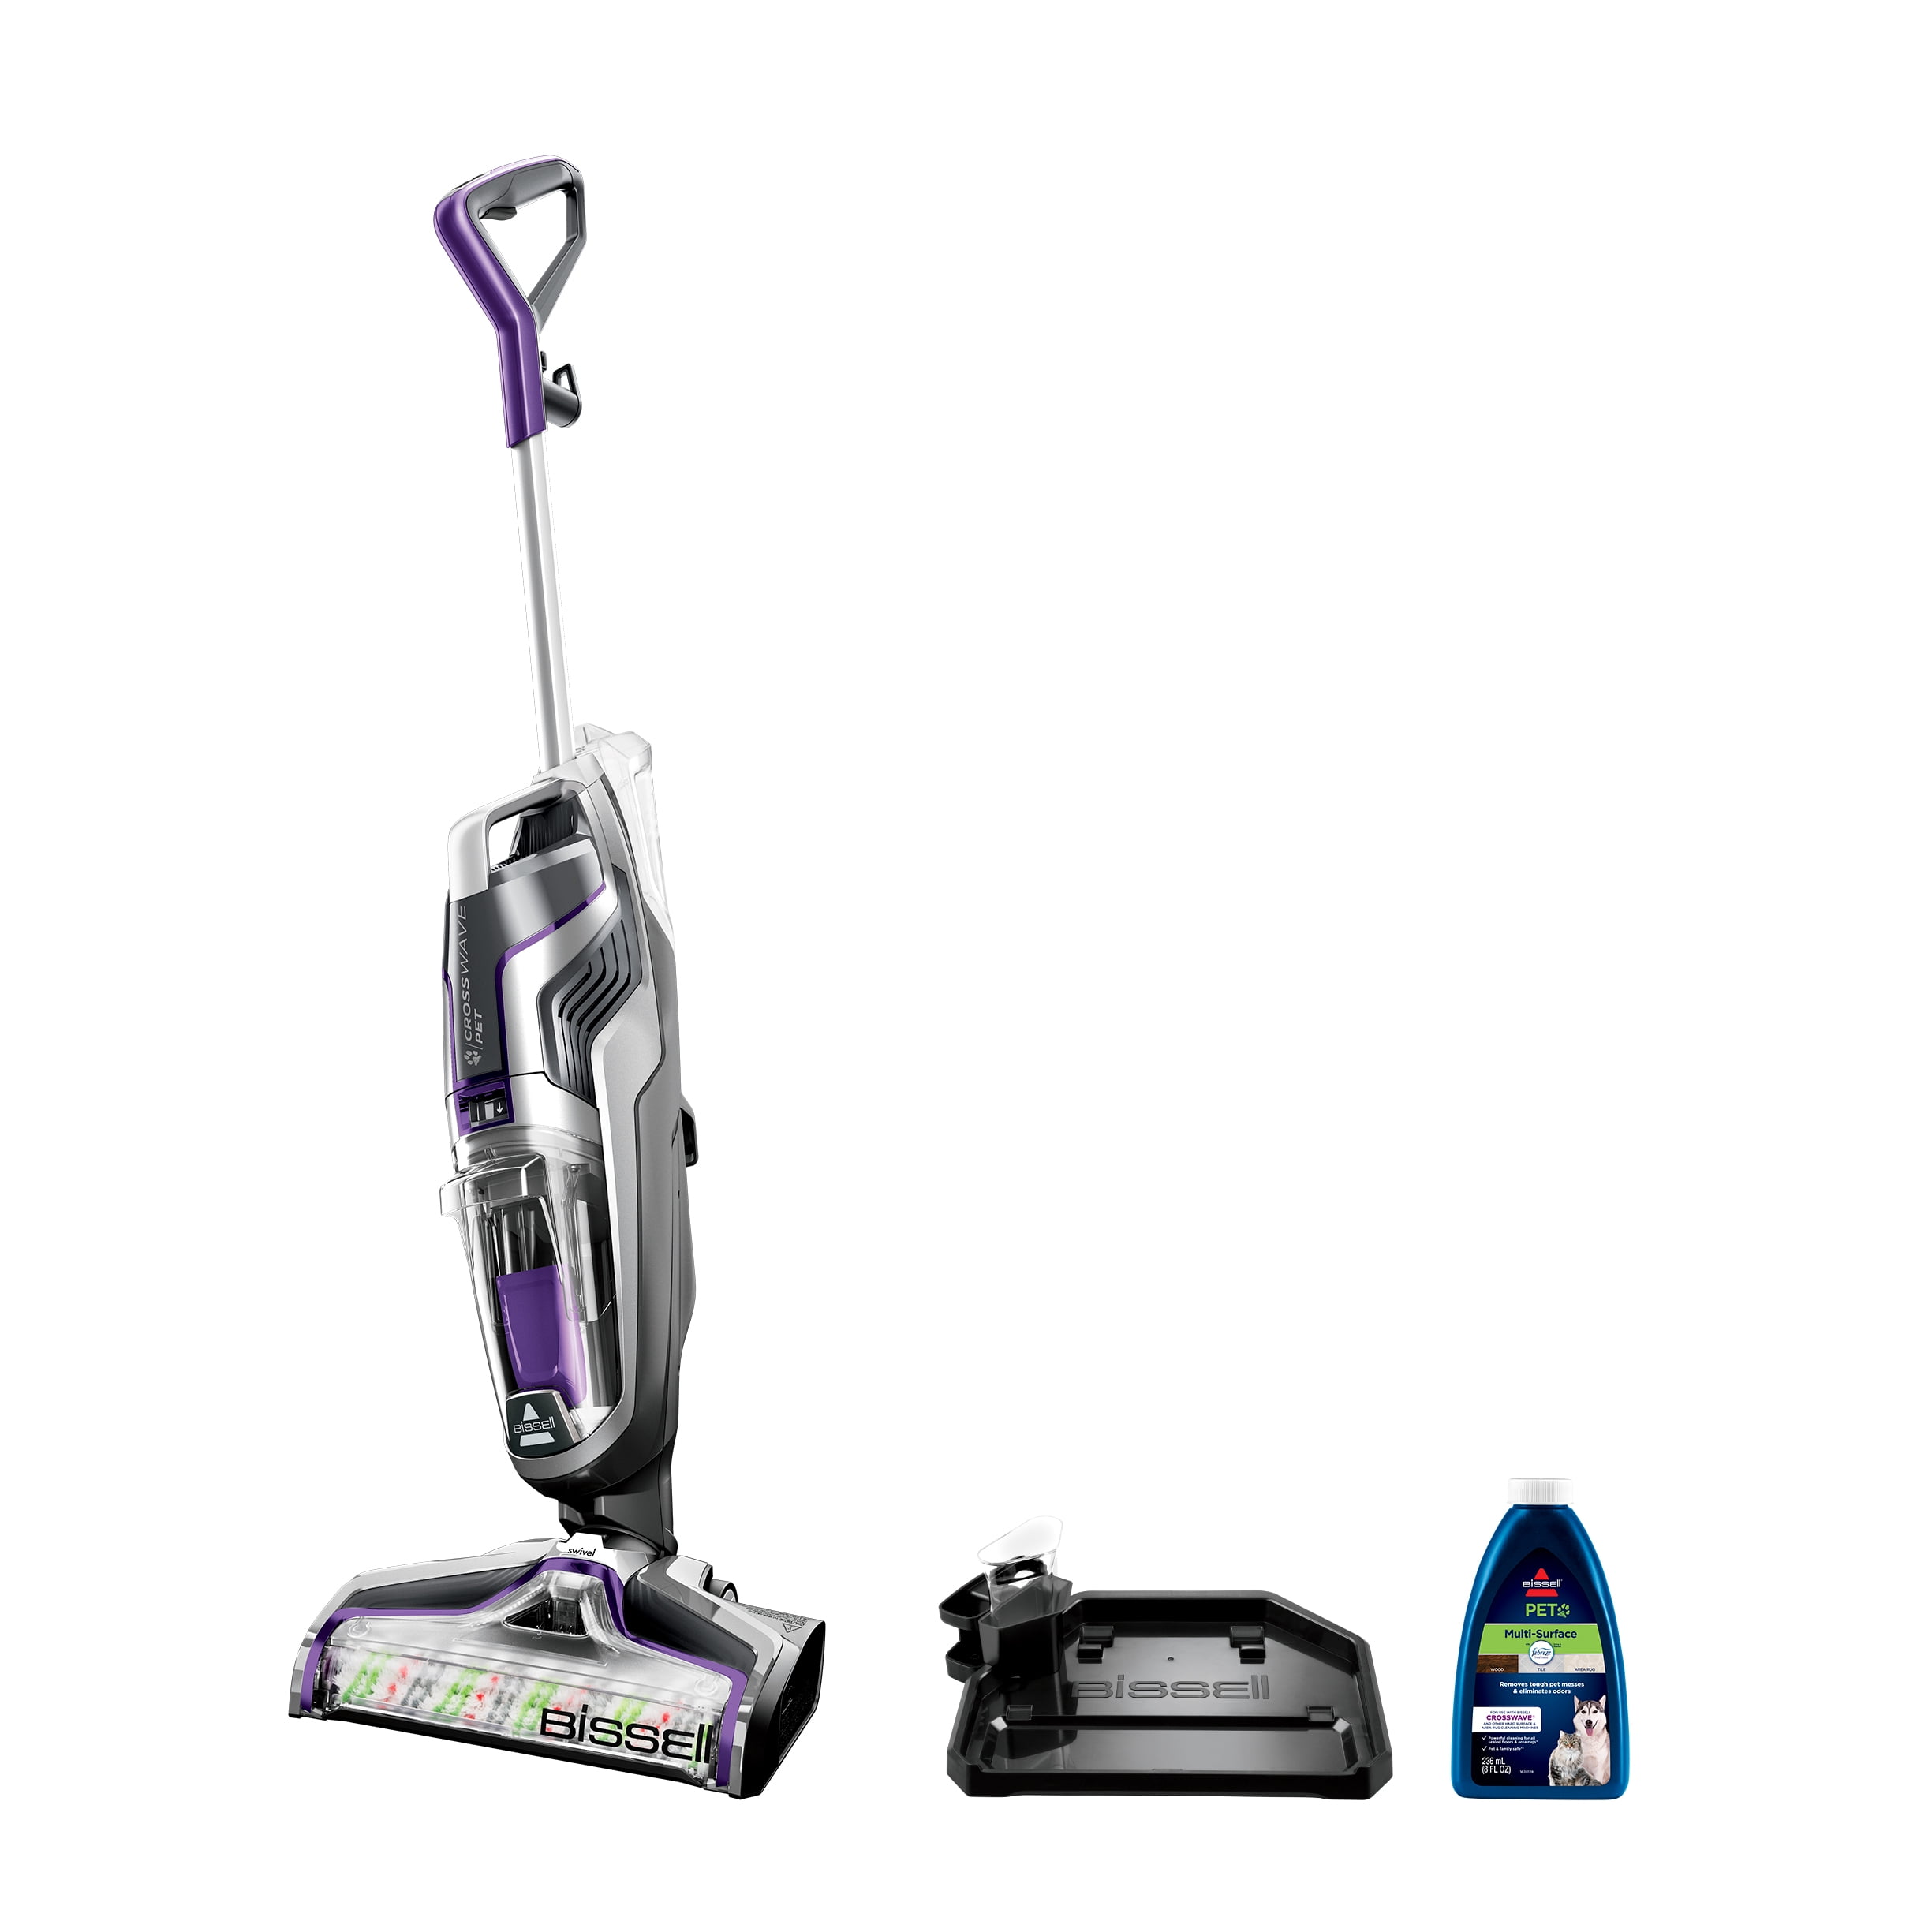  BISSELL Crosswave Pet Pro All in One Wet Dry Vacuum Cleaner,  2306A with Bissell 2295L Multi-Surface Pet Formula (80 oz) and BISSELL  Tangle-Free Crosswave Multi-Surface Pet Brush Roll, White - 2460 